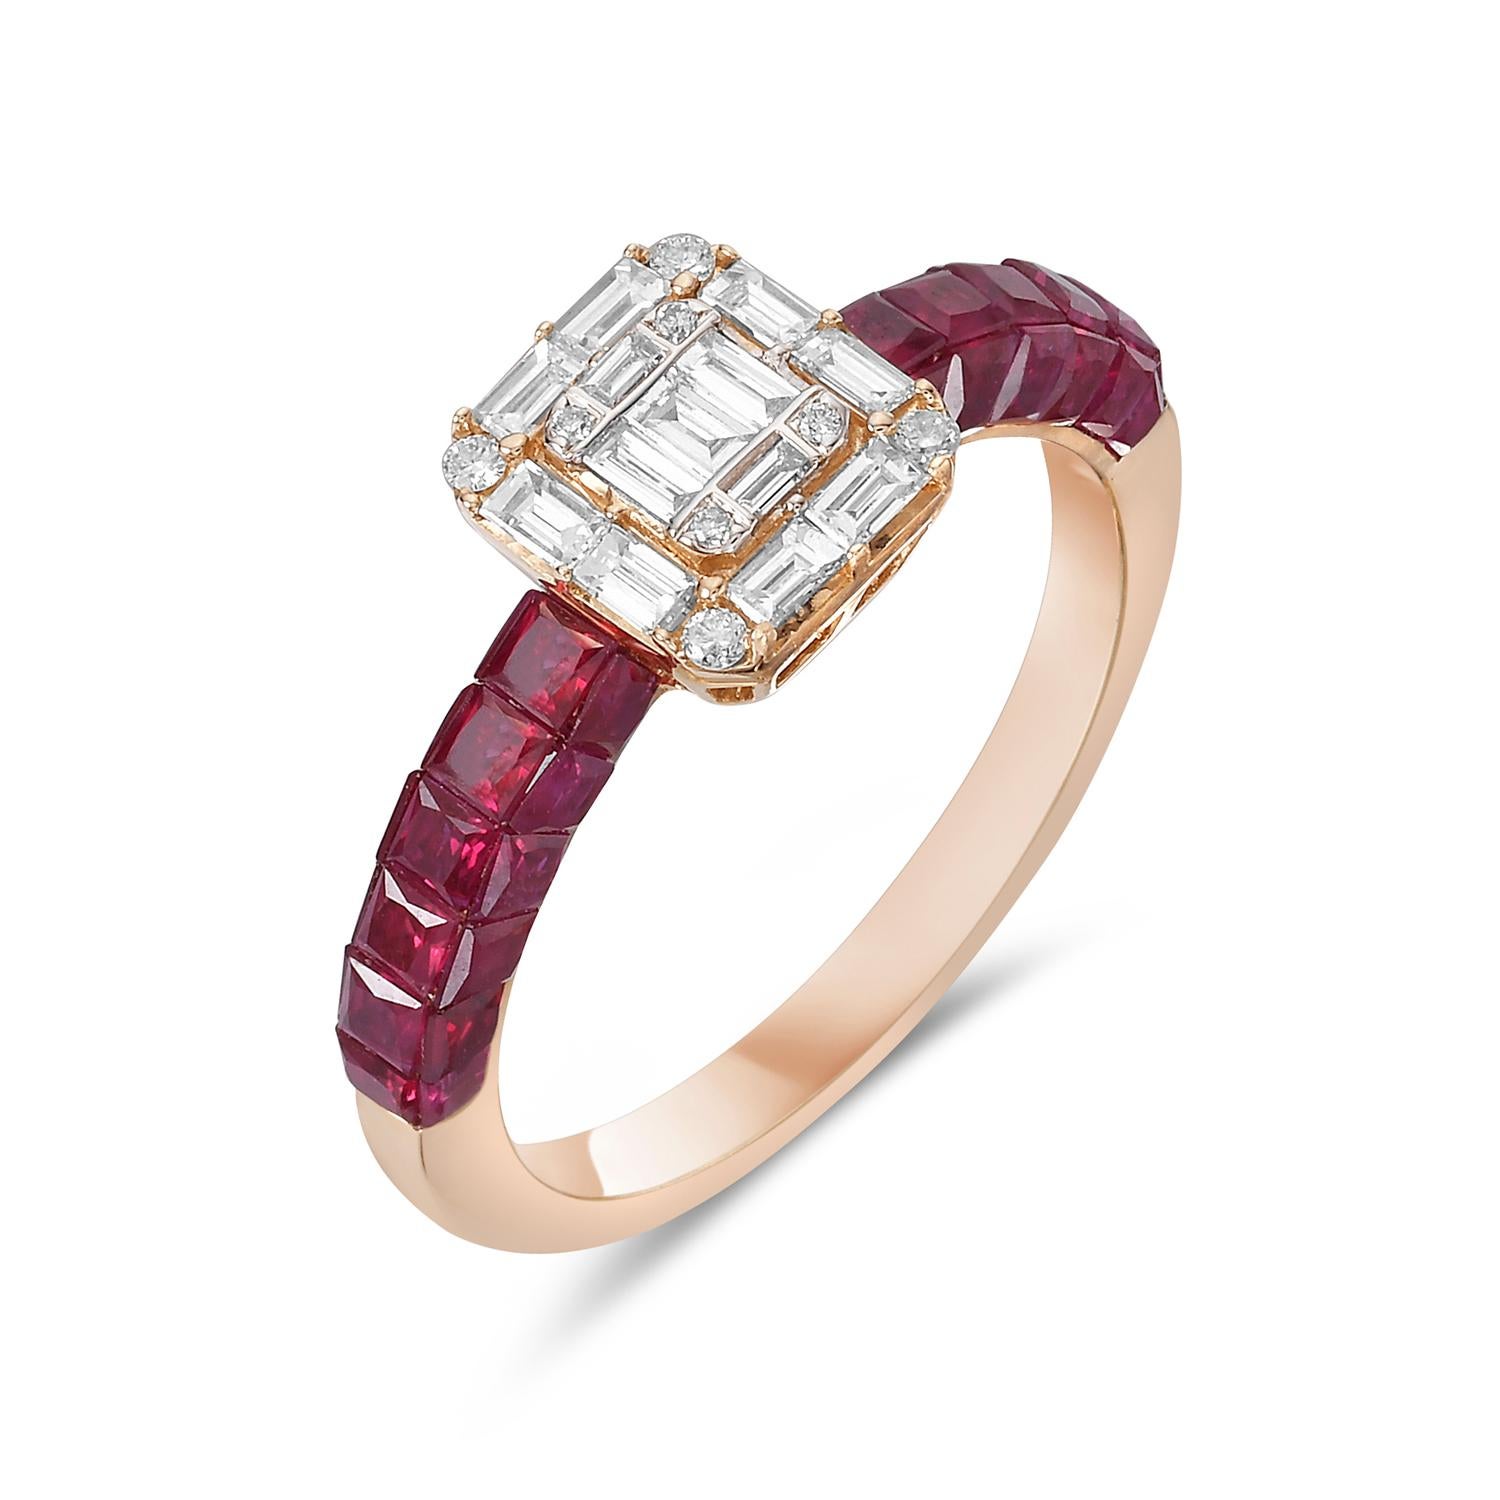 Artisan 2.46 Ct Ruby Ring With Diamonds In Center Made In 18k Gold For Sale